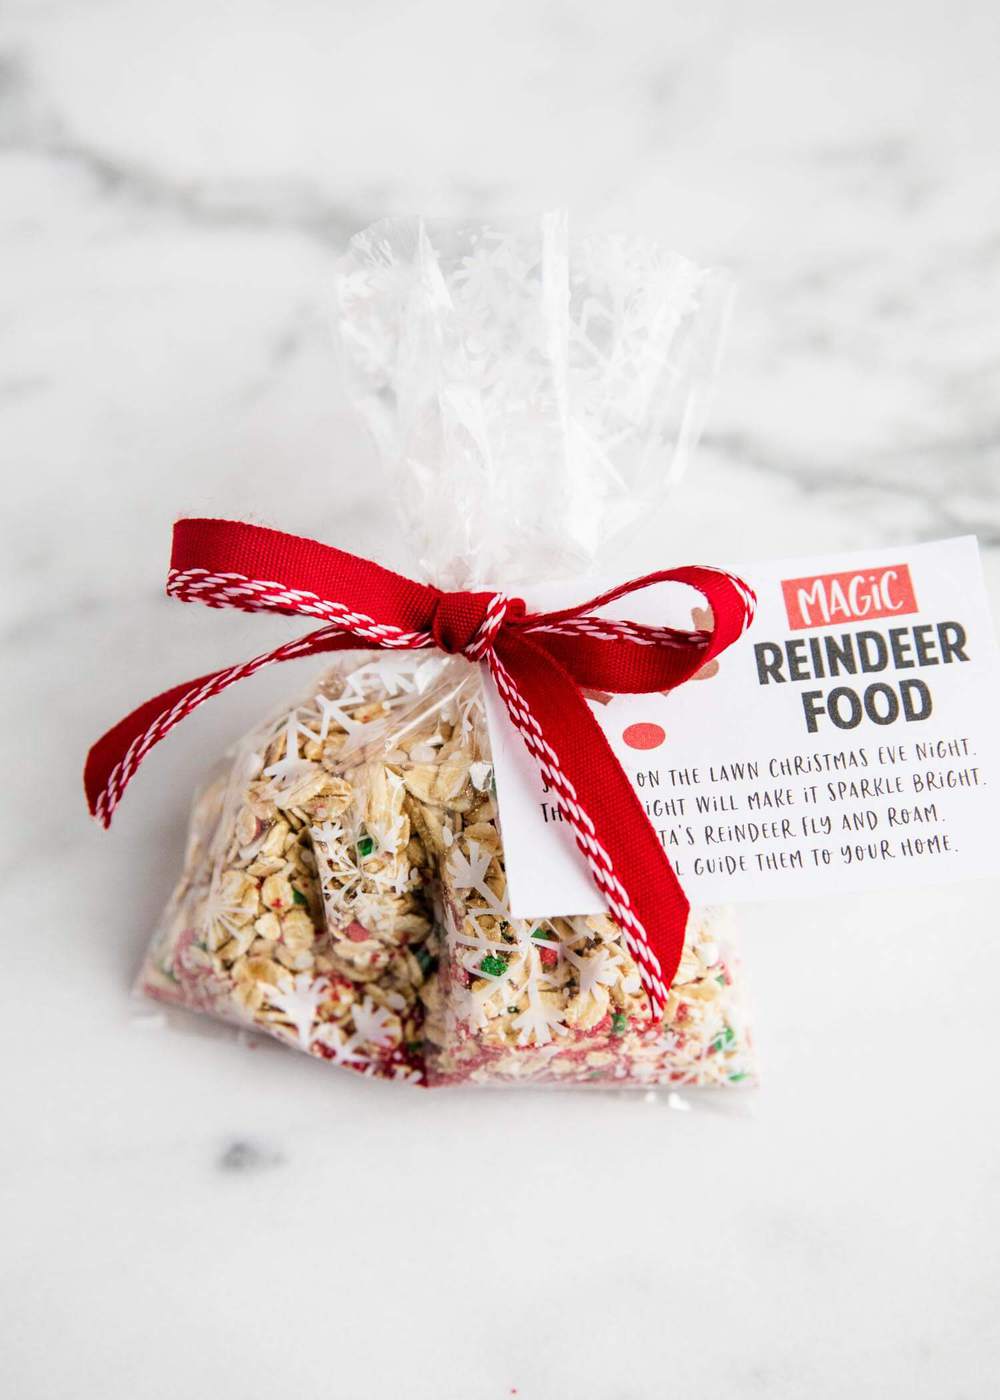 Bag of reindeer food with red bow and poem tag. 